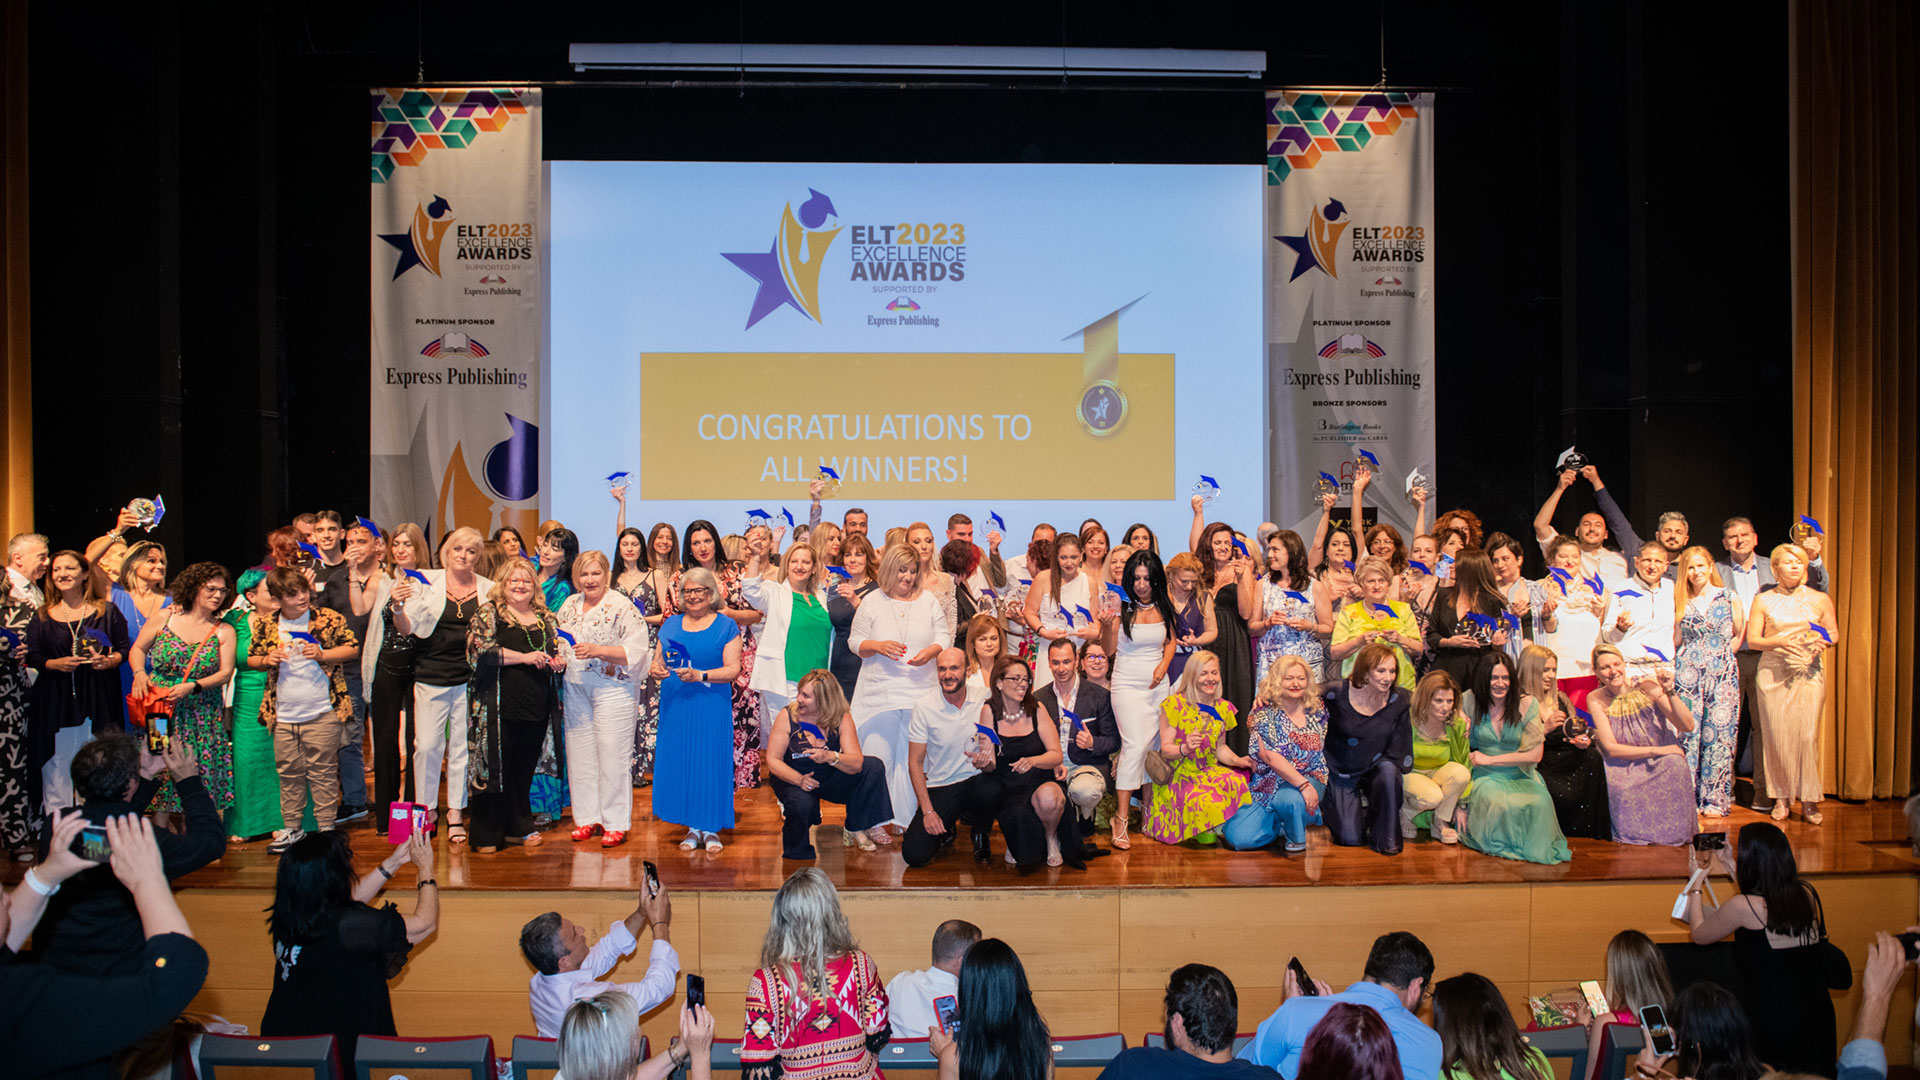 2023 ELT Excellence Awards Celebrate Outstanding Achievements in English Language Teaching